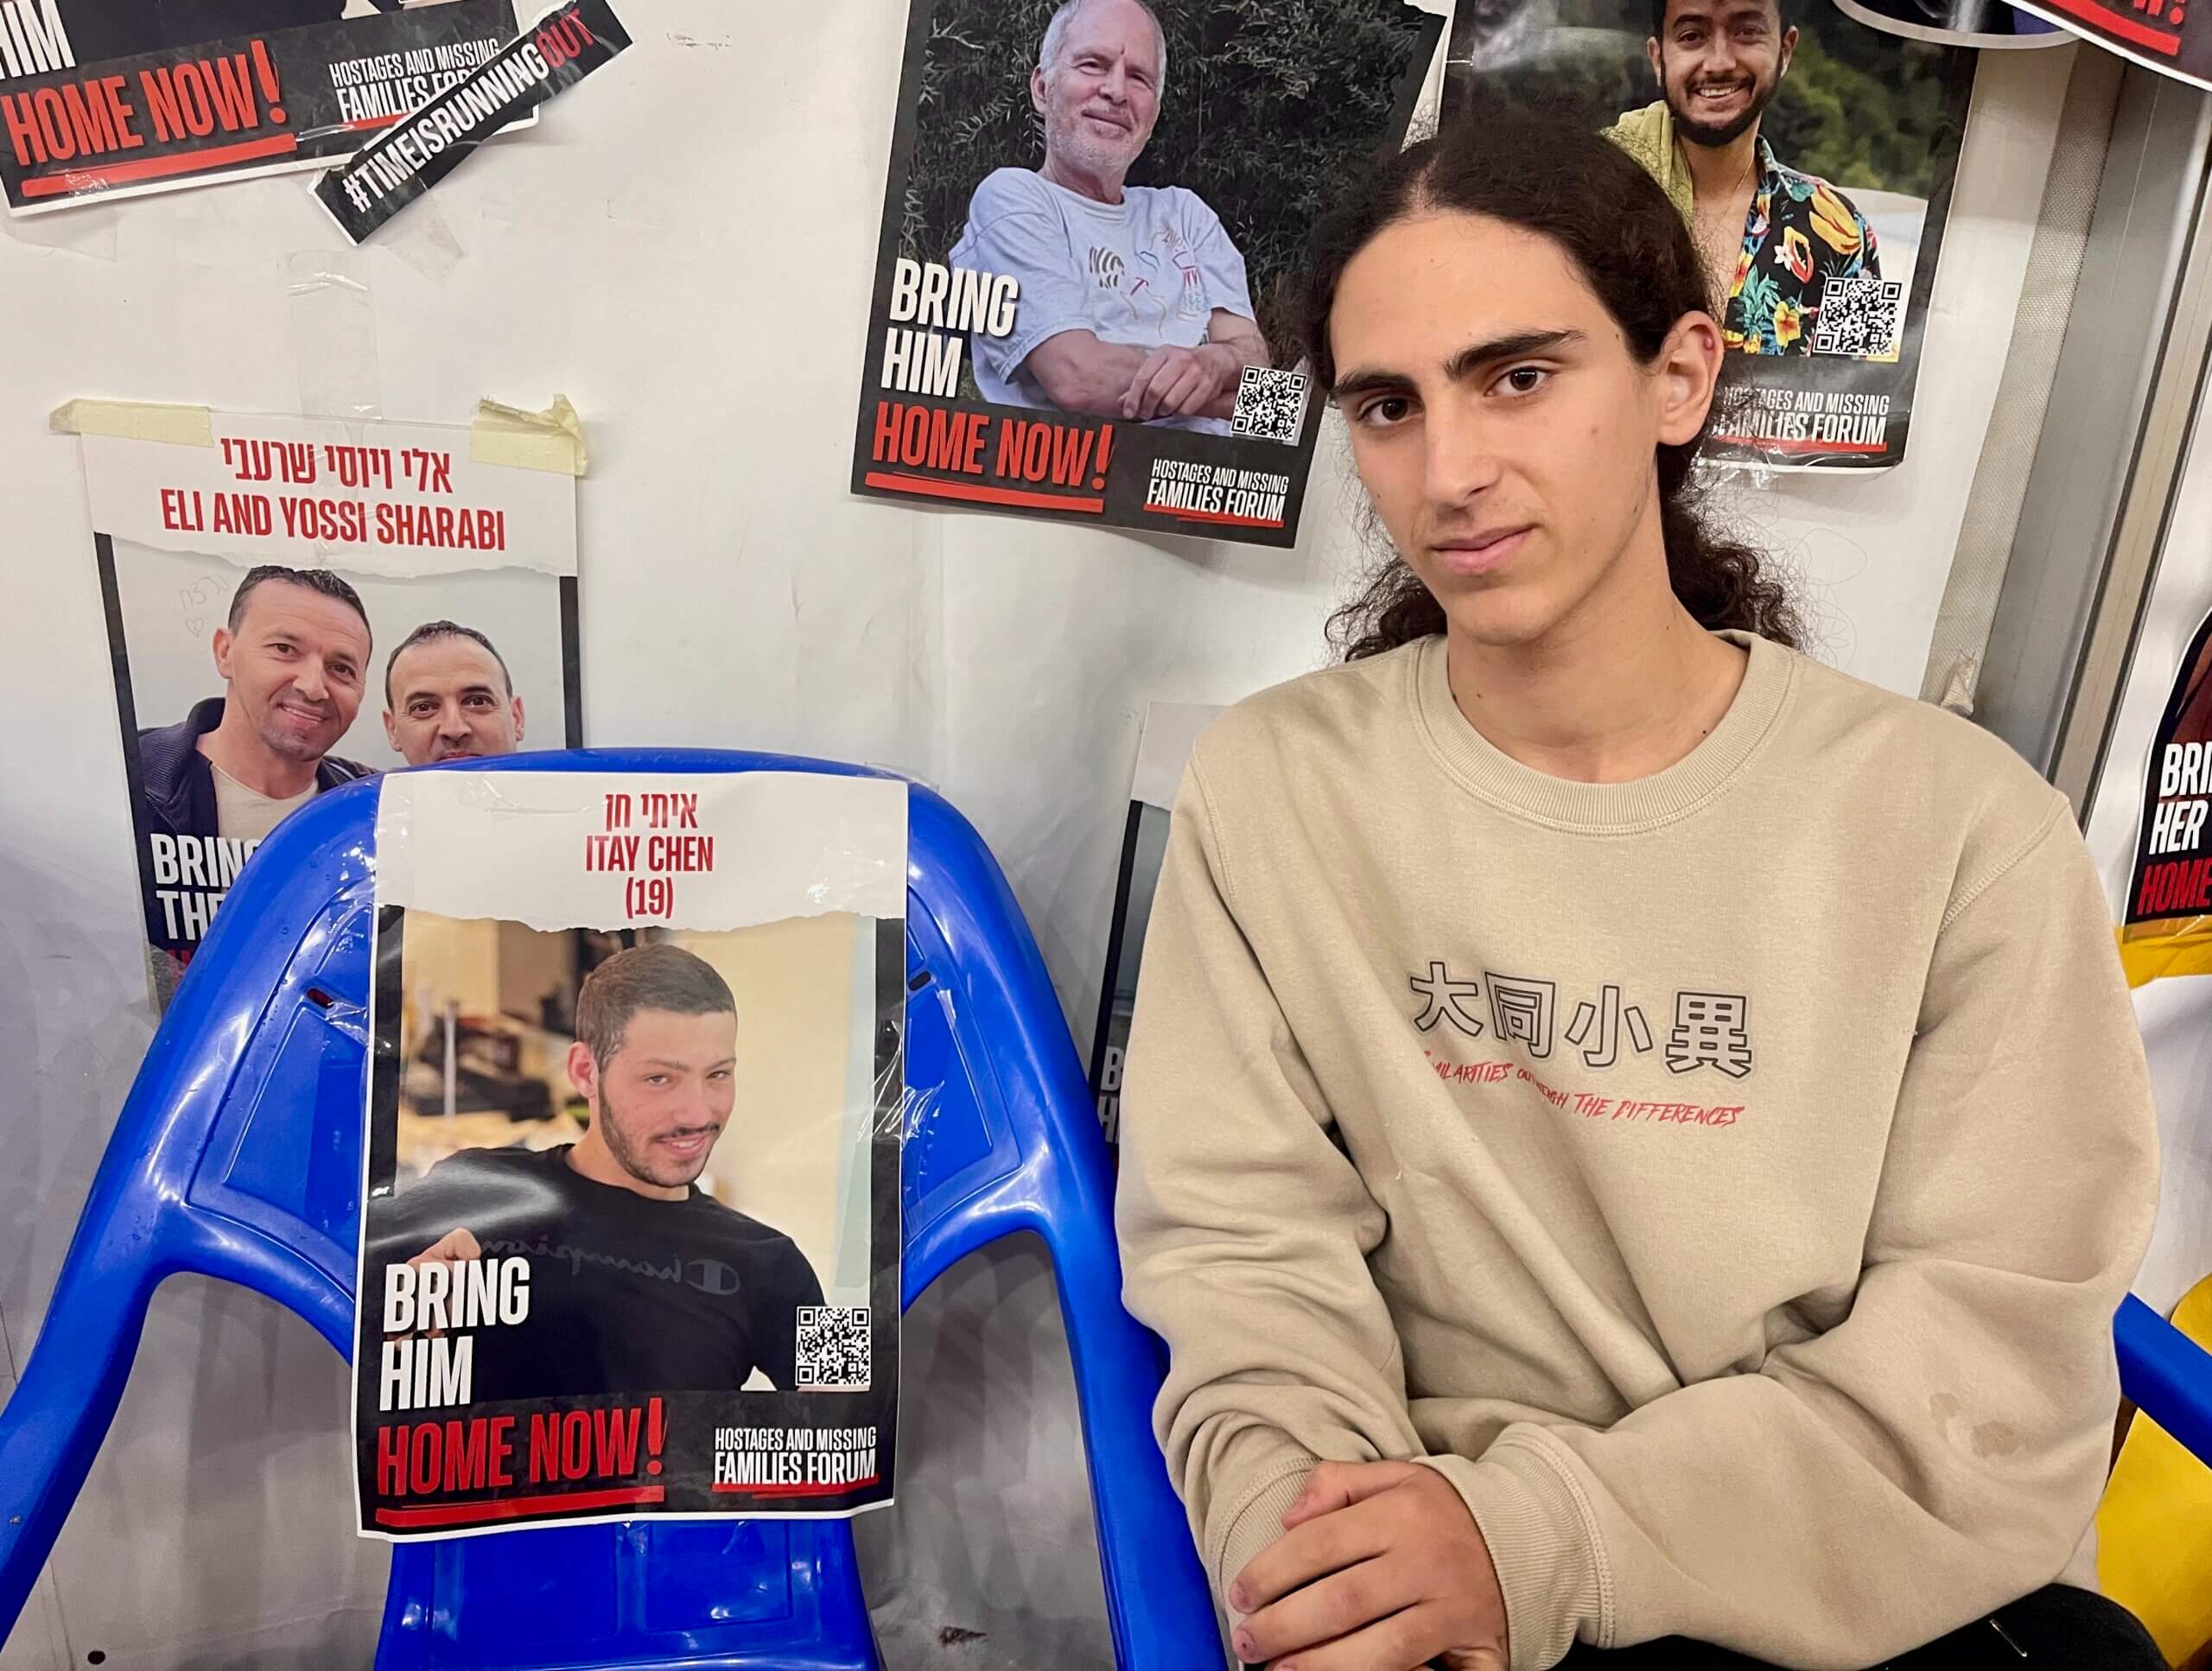 Ofek Sinvani, 17, has an speecial affinity for hostage Itay Chen because he knows him. The IDF soldier abducted October 7 was Sinvani's mentor in youth group.